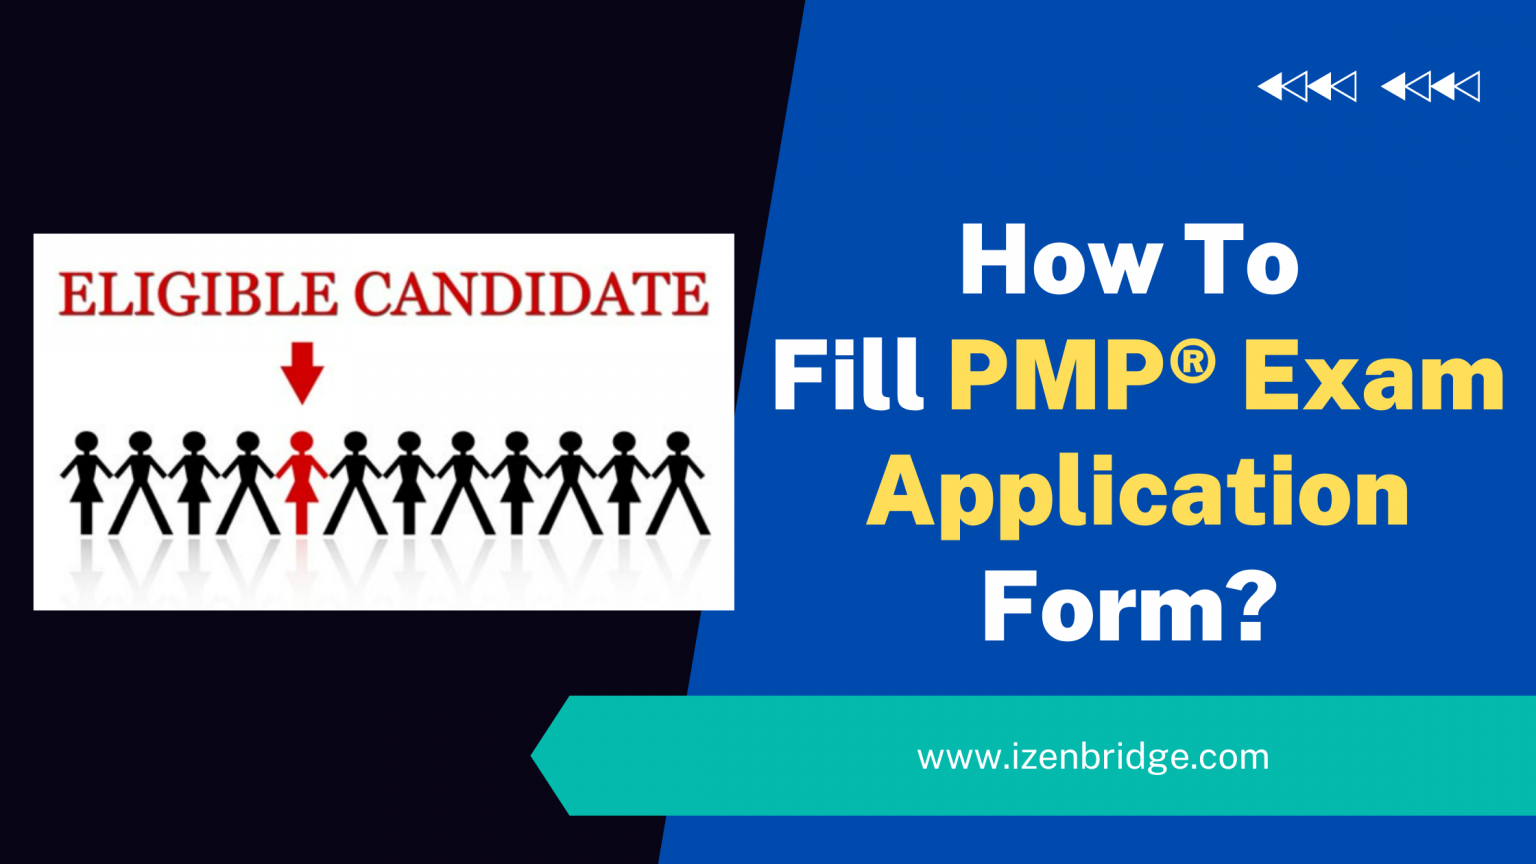 How To Fill The Work Experience Details In PMP Application Form?